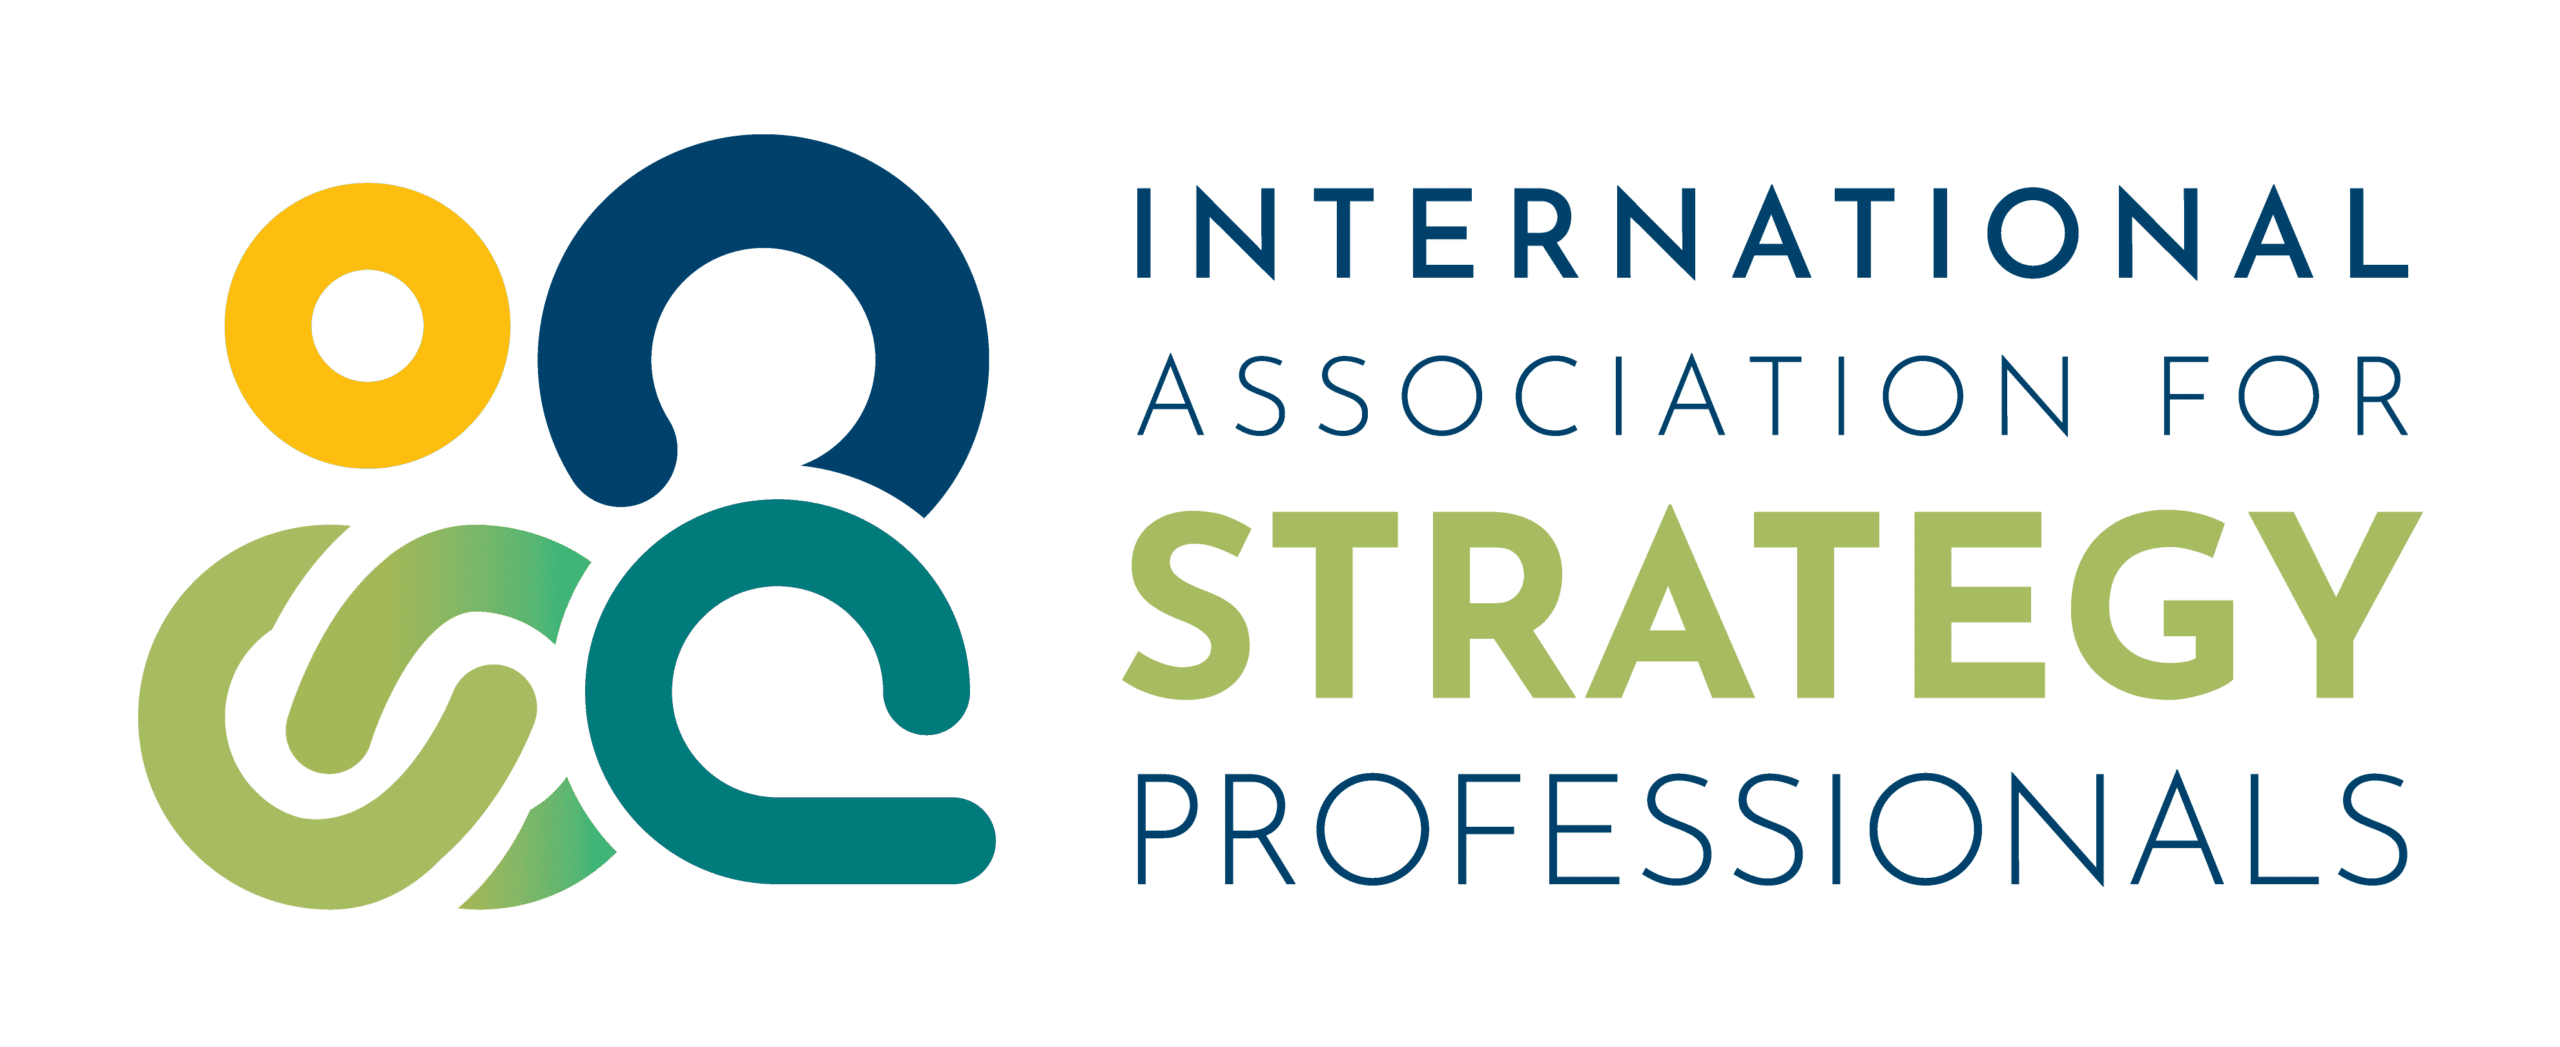 International association for strategy professionals